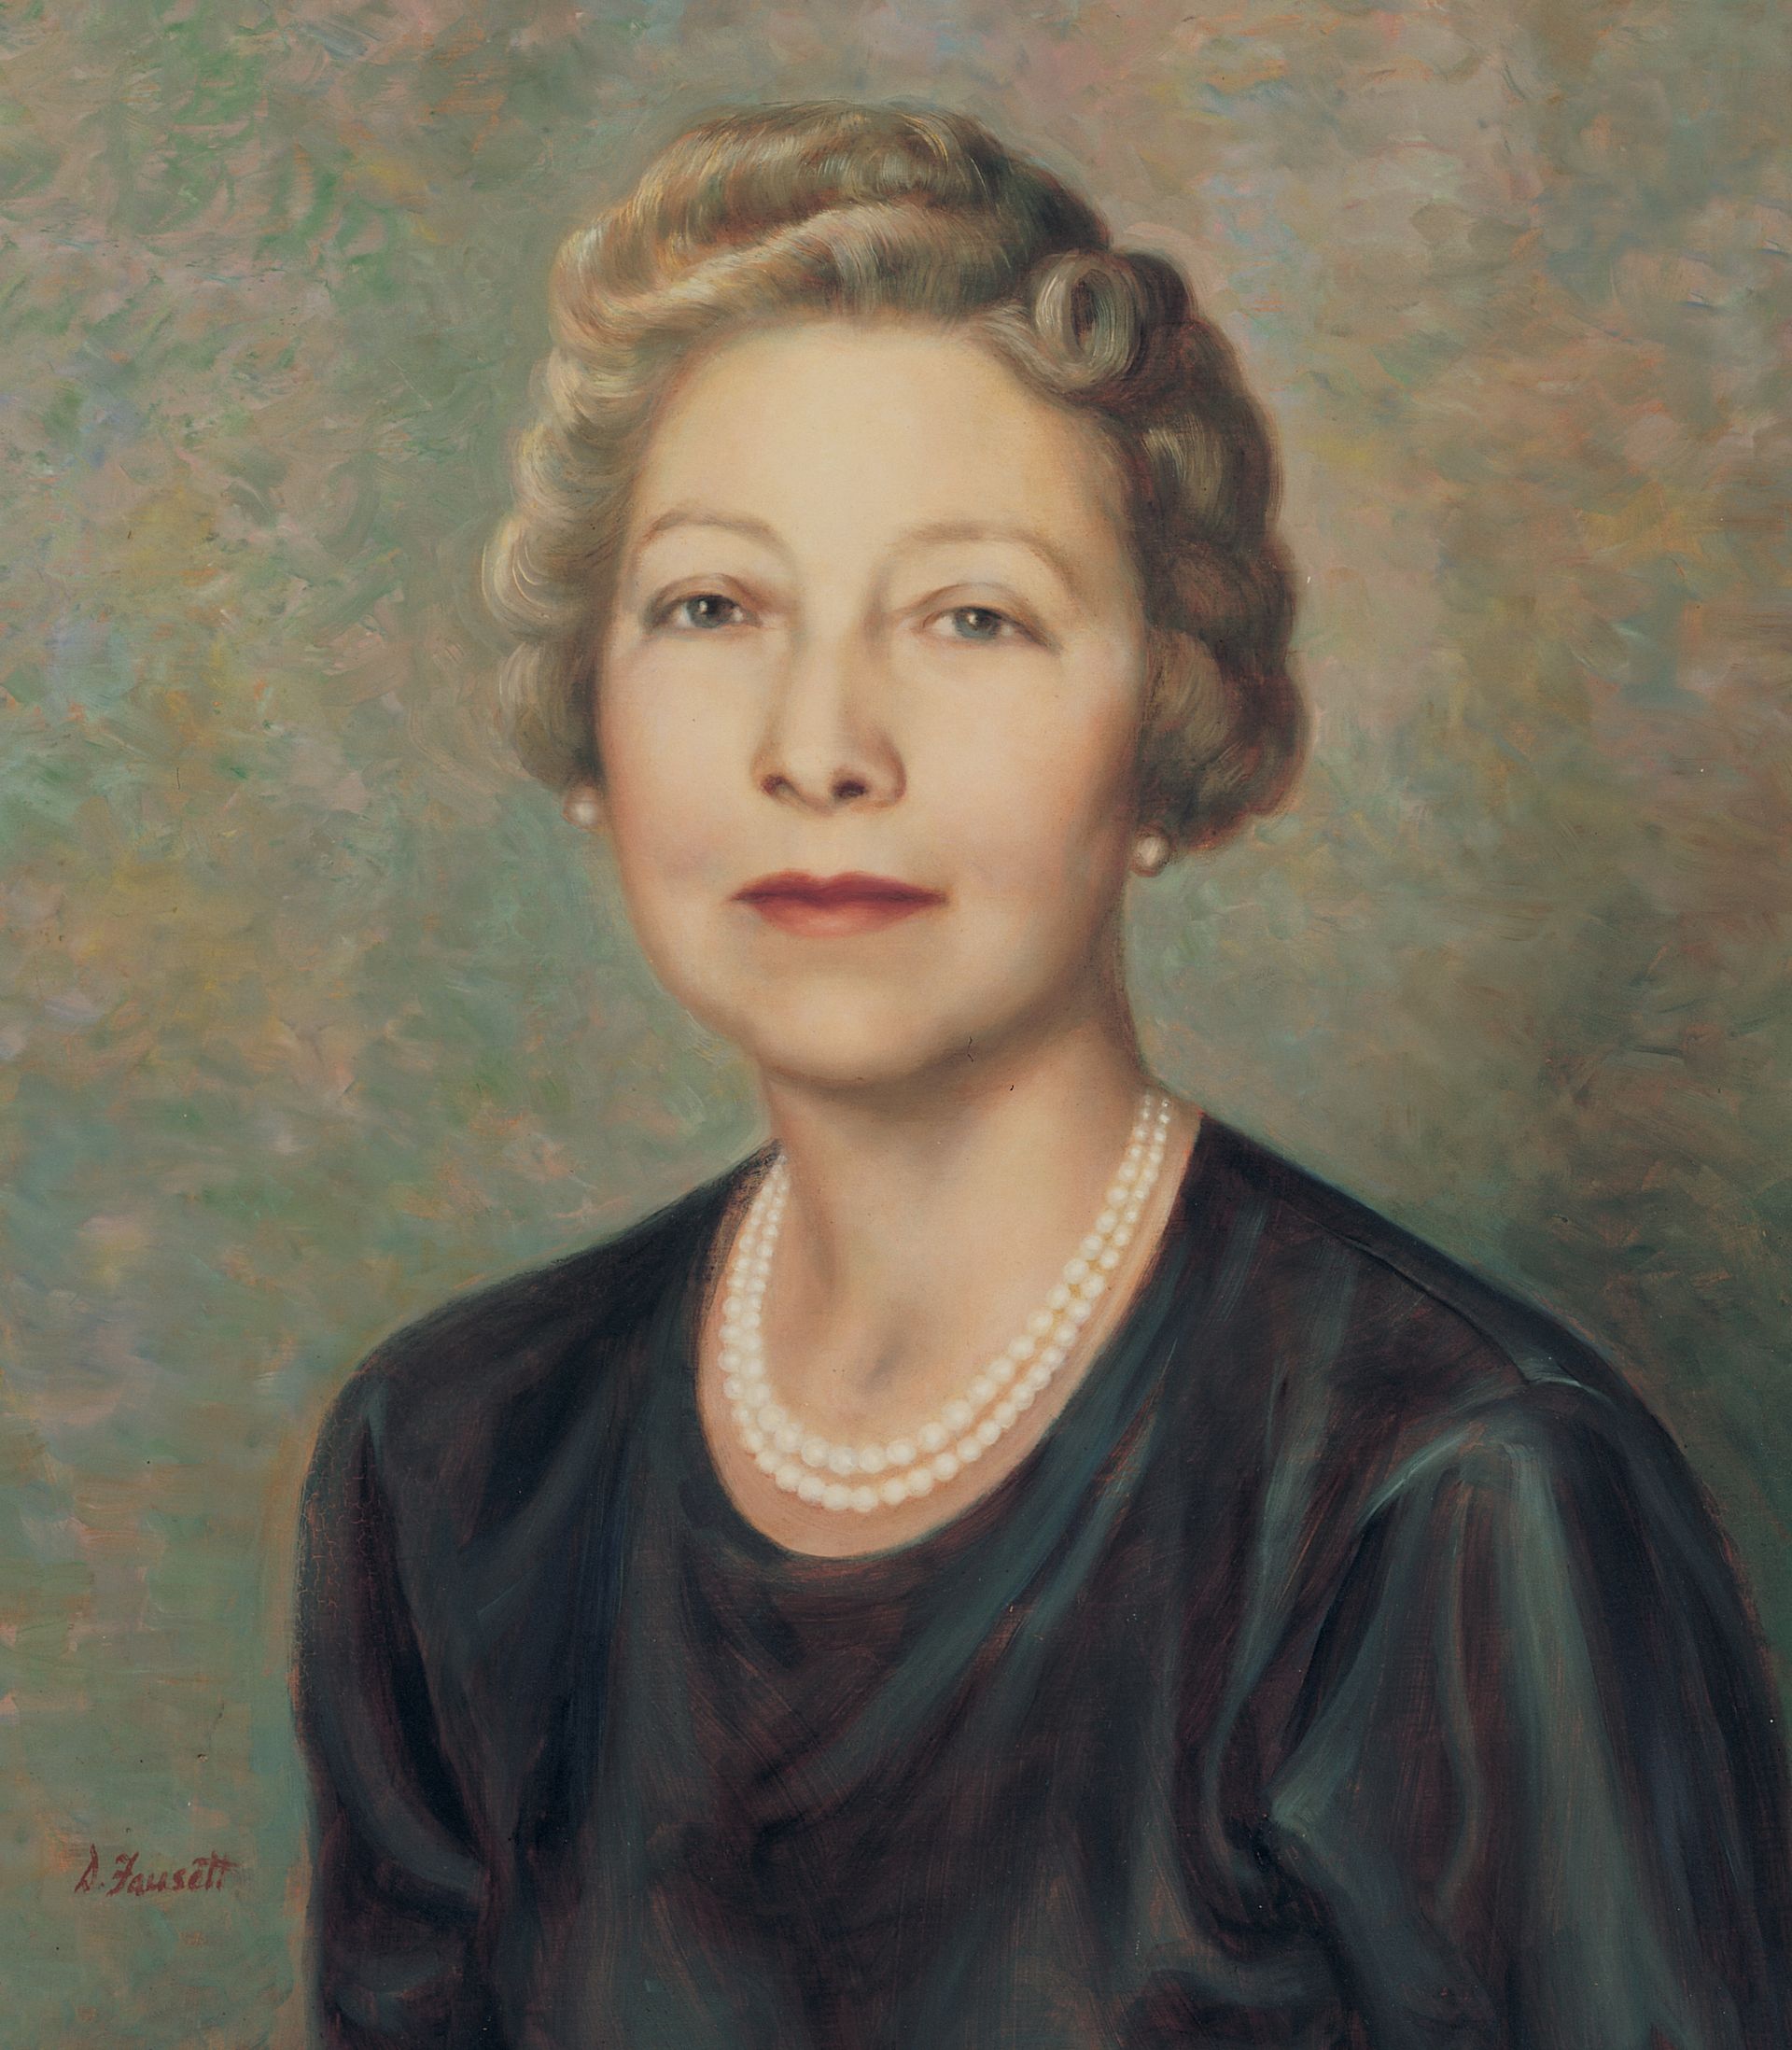 A portrait of Adele Cannon Howells, who was the fourth Primary general president from 1943 to 1951; painted by Dean Fausett.